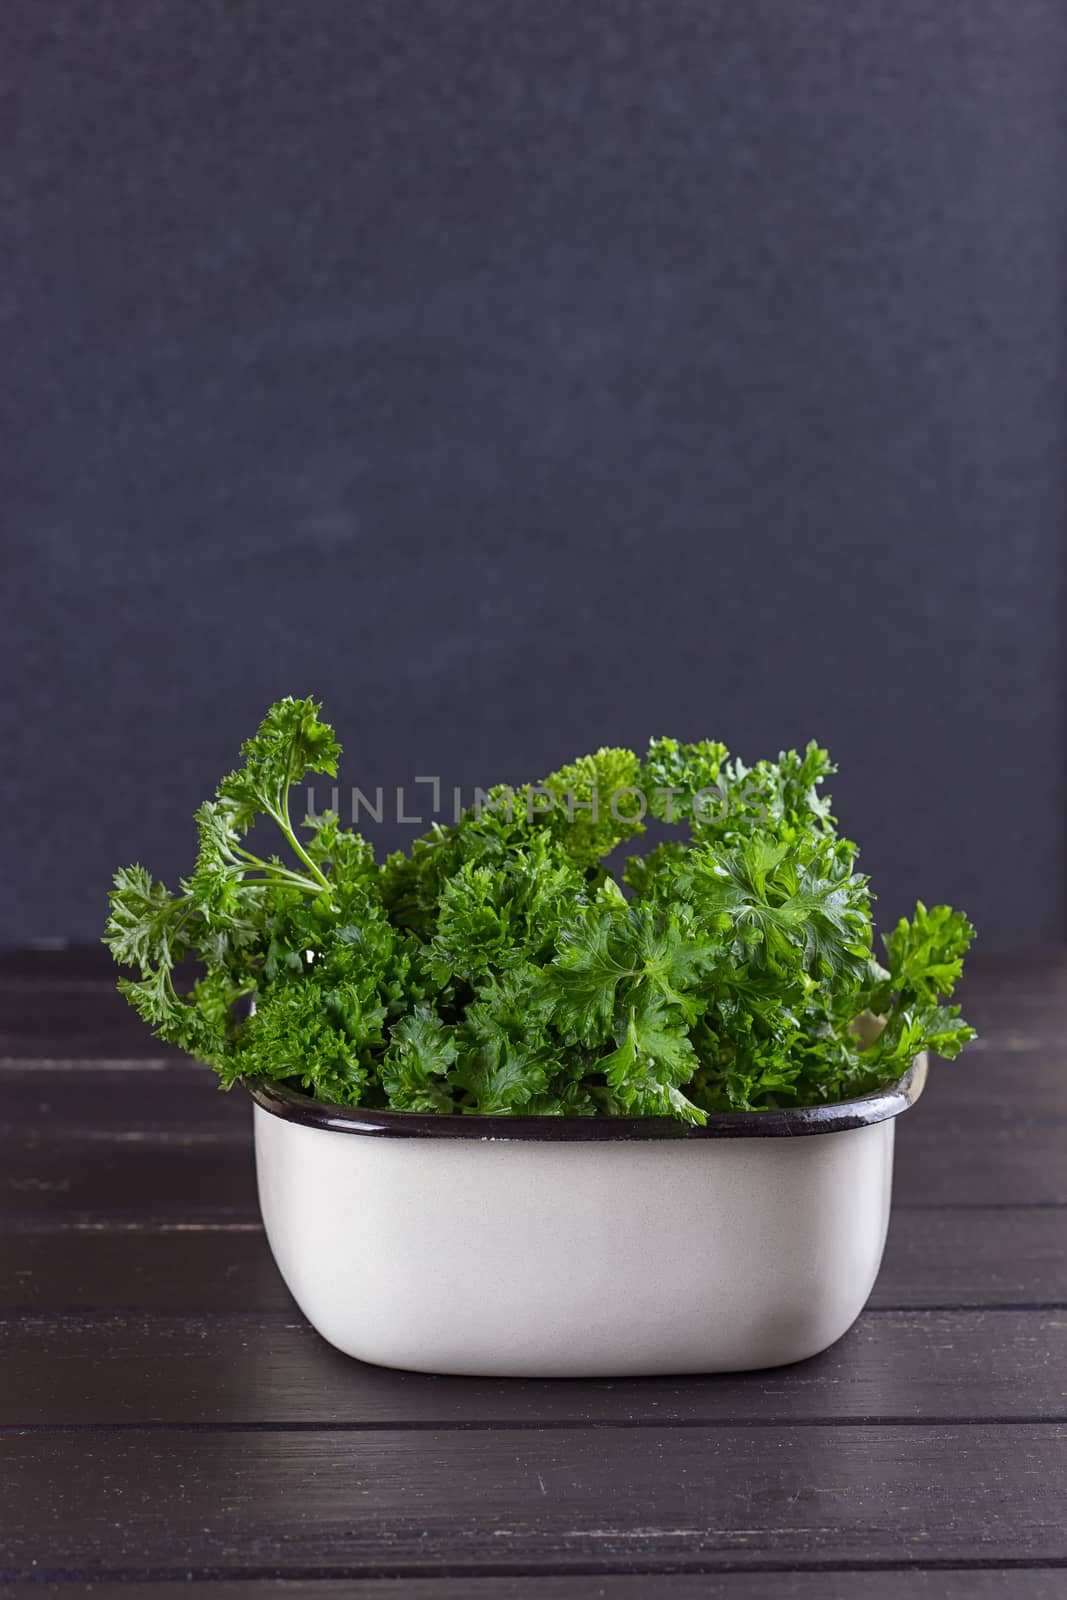 A bunch of fresh parsley in a ceramic tray on a black background. by victosha